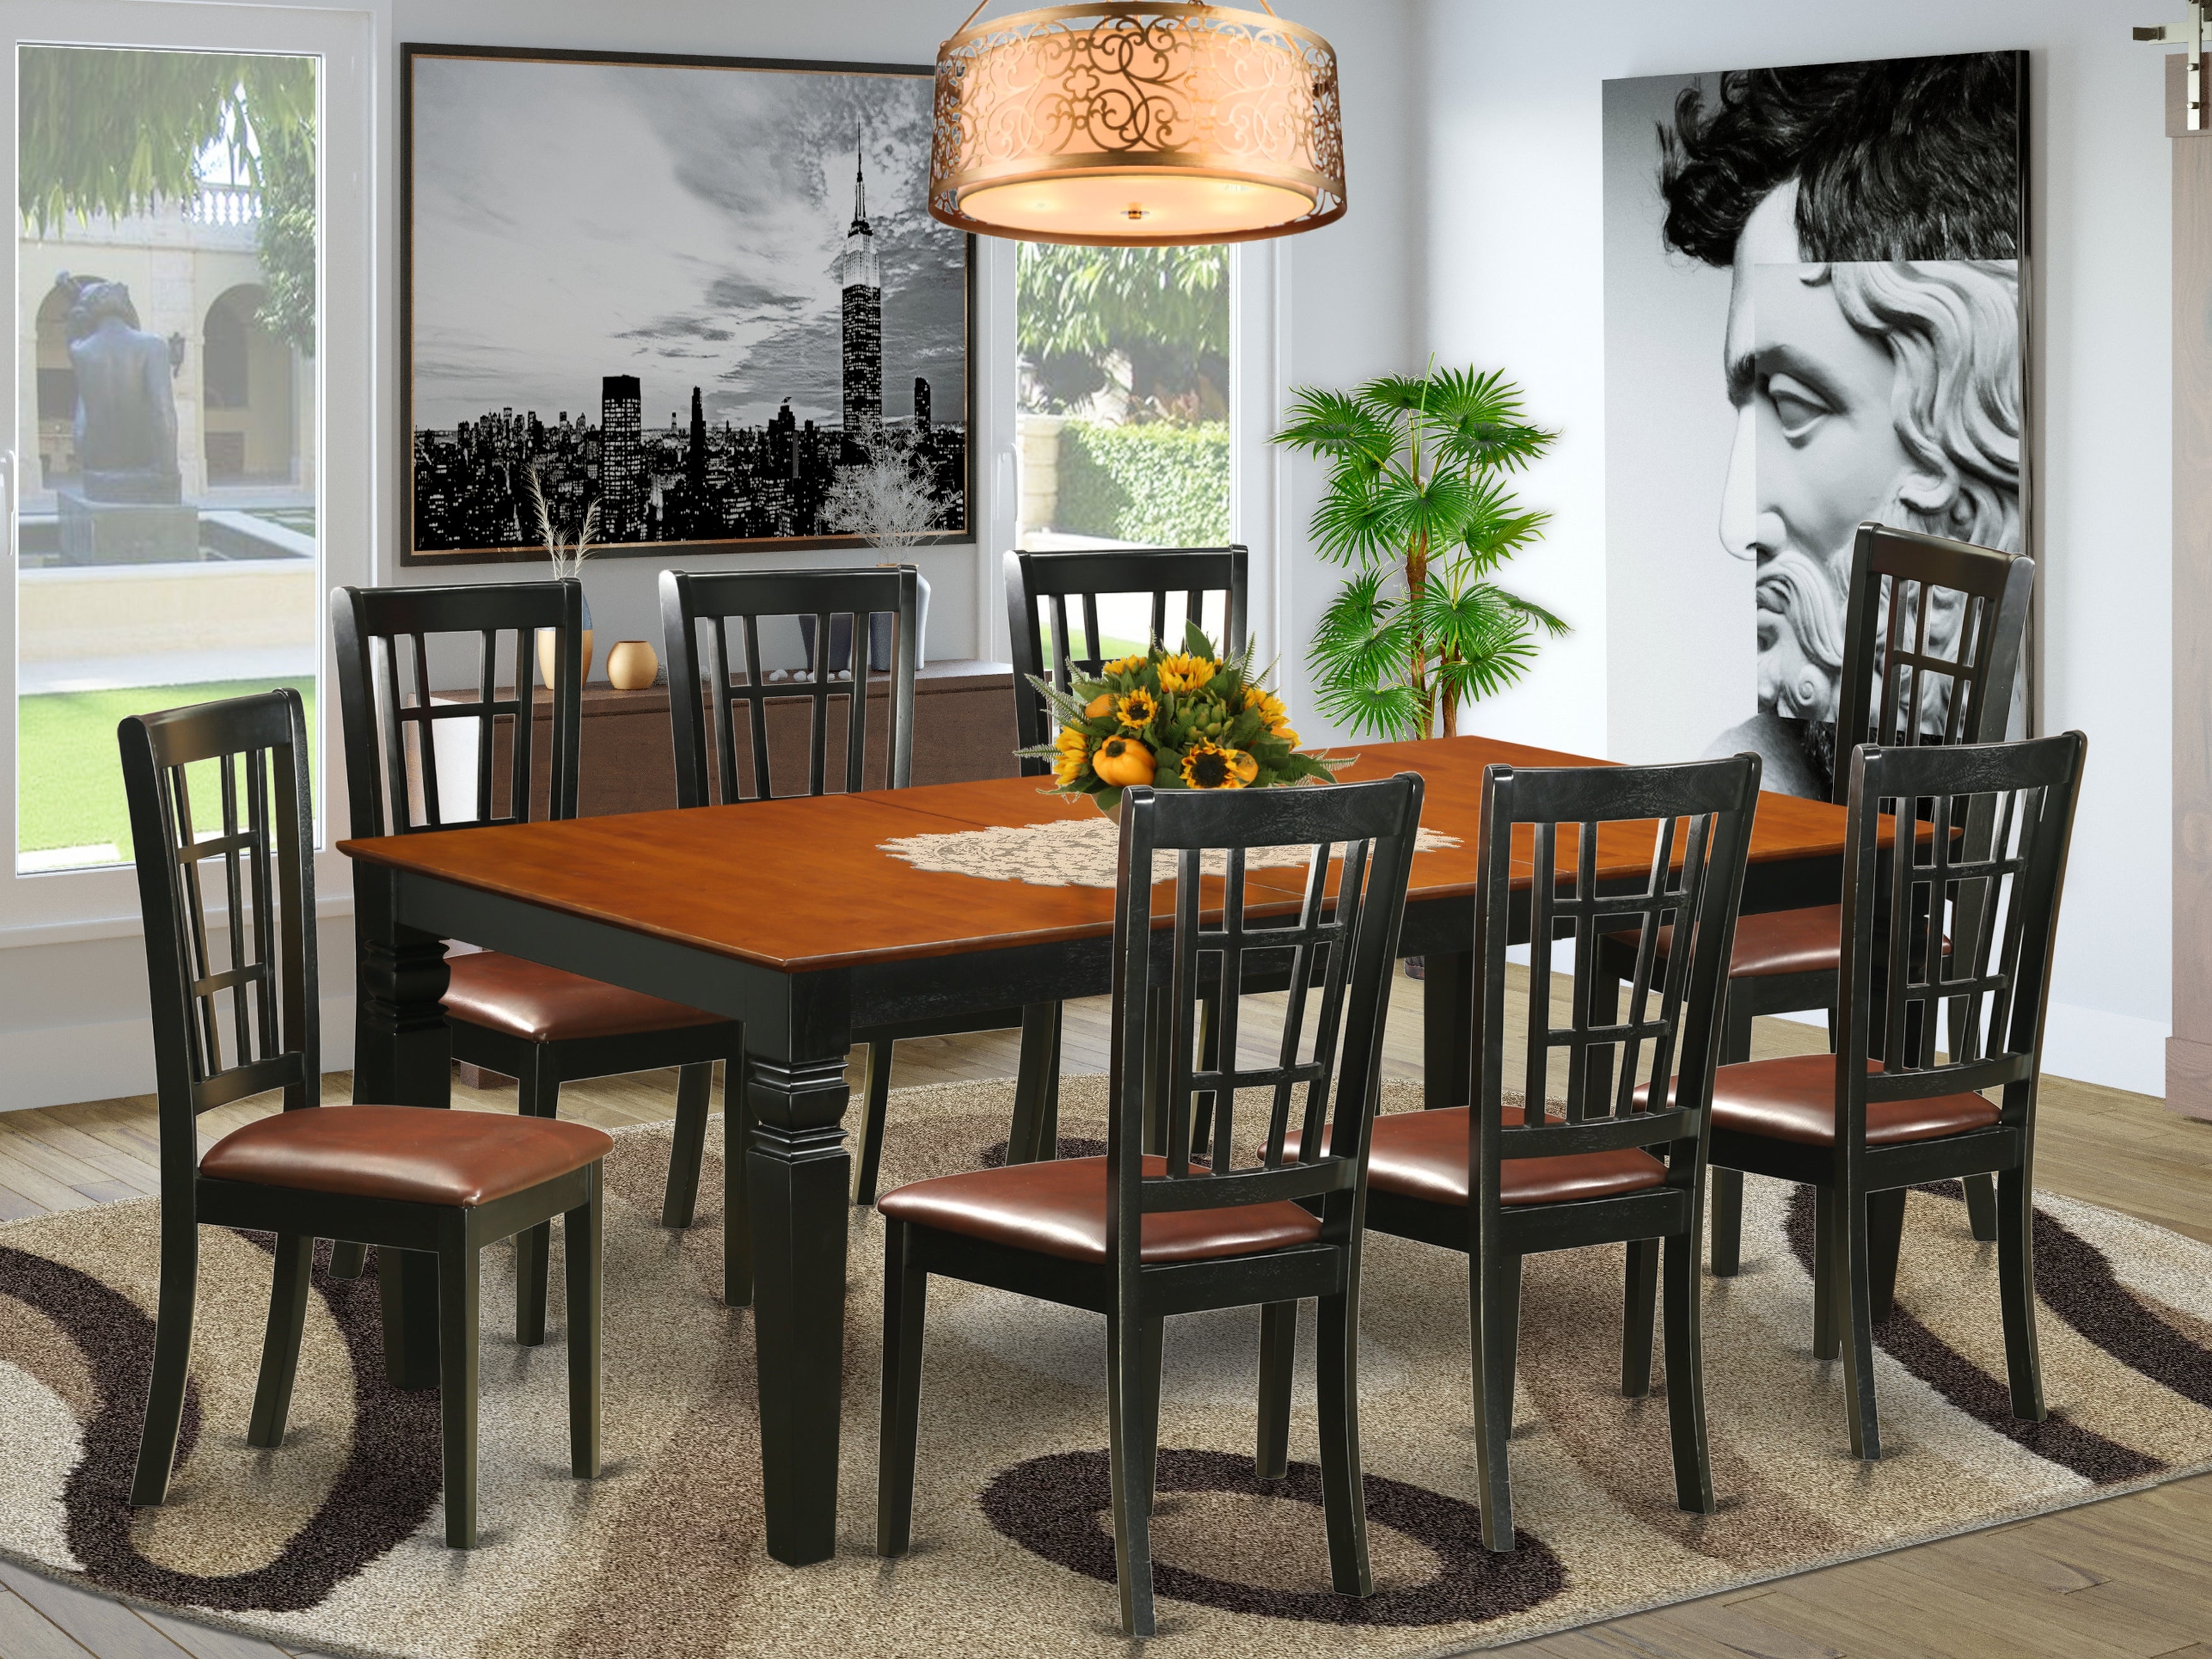 LGNI9-BCH-LC 9 PC Kitchen Table set with a Dining Table and 8 Dining Chairs in Black and Cherry